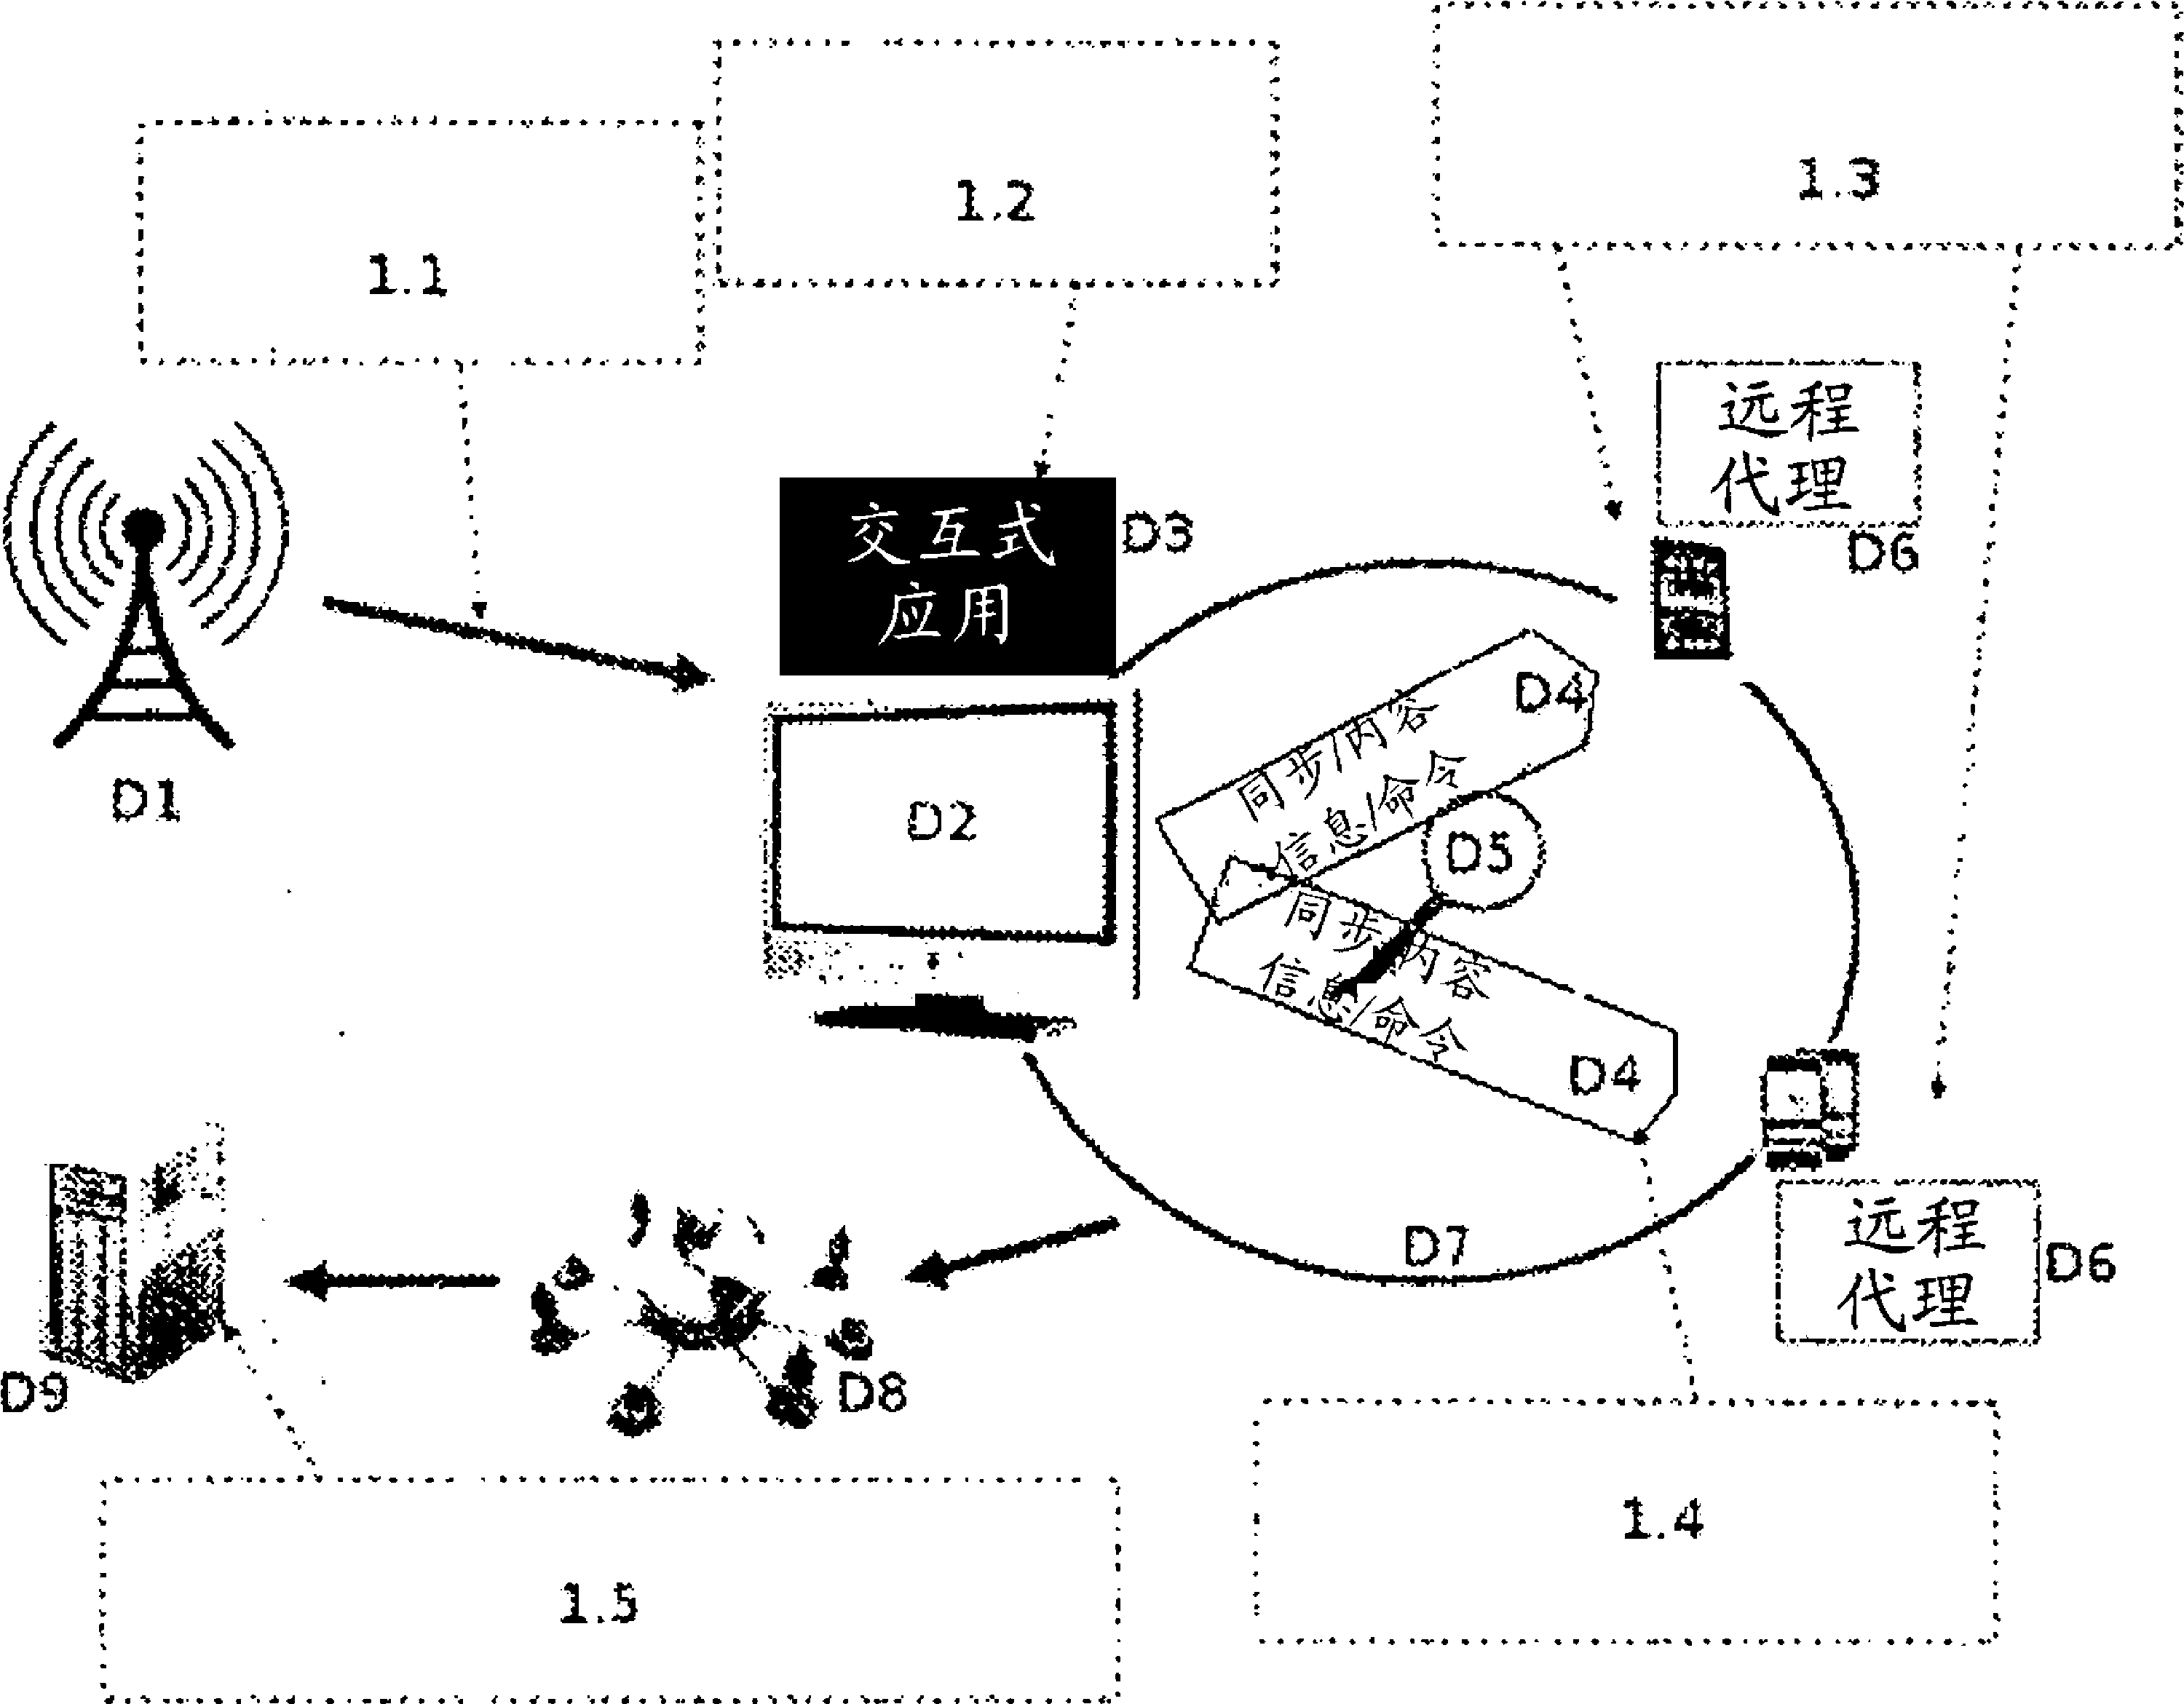 System for synchronizing content transmitted to a digital TV receiver with multiple portable devices with or without internet access